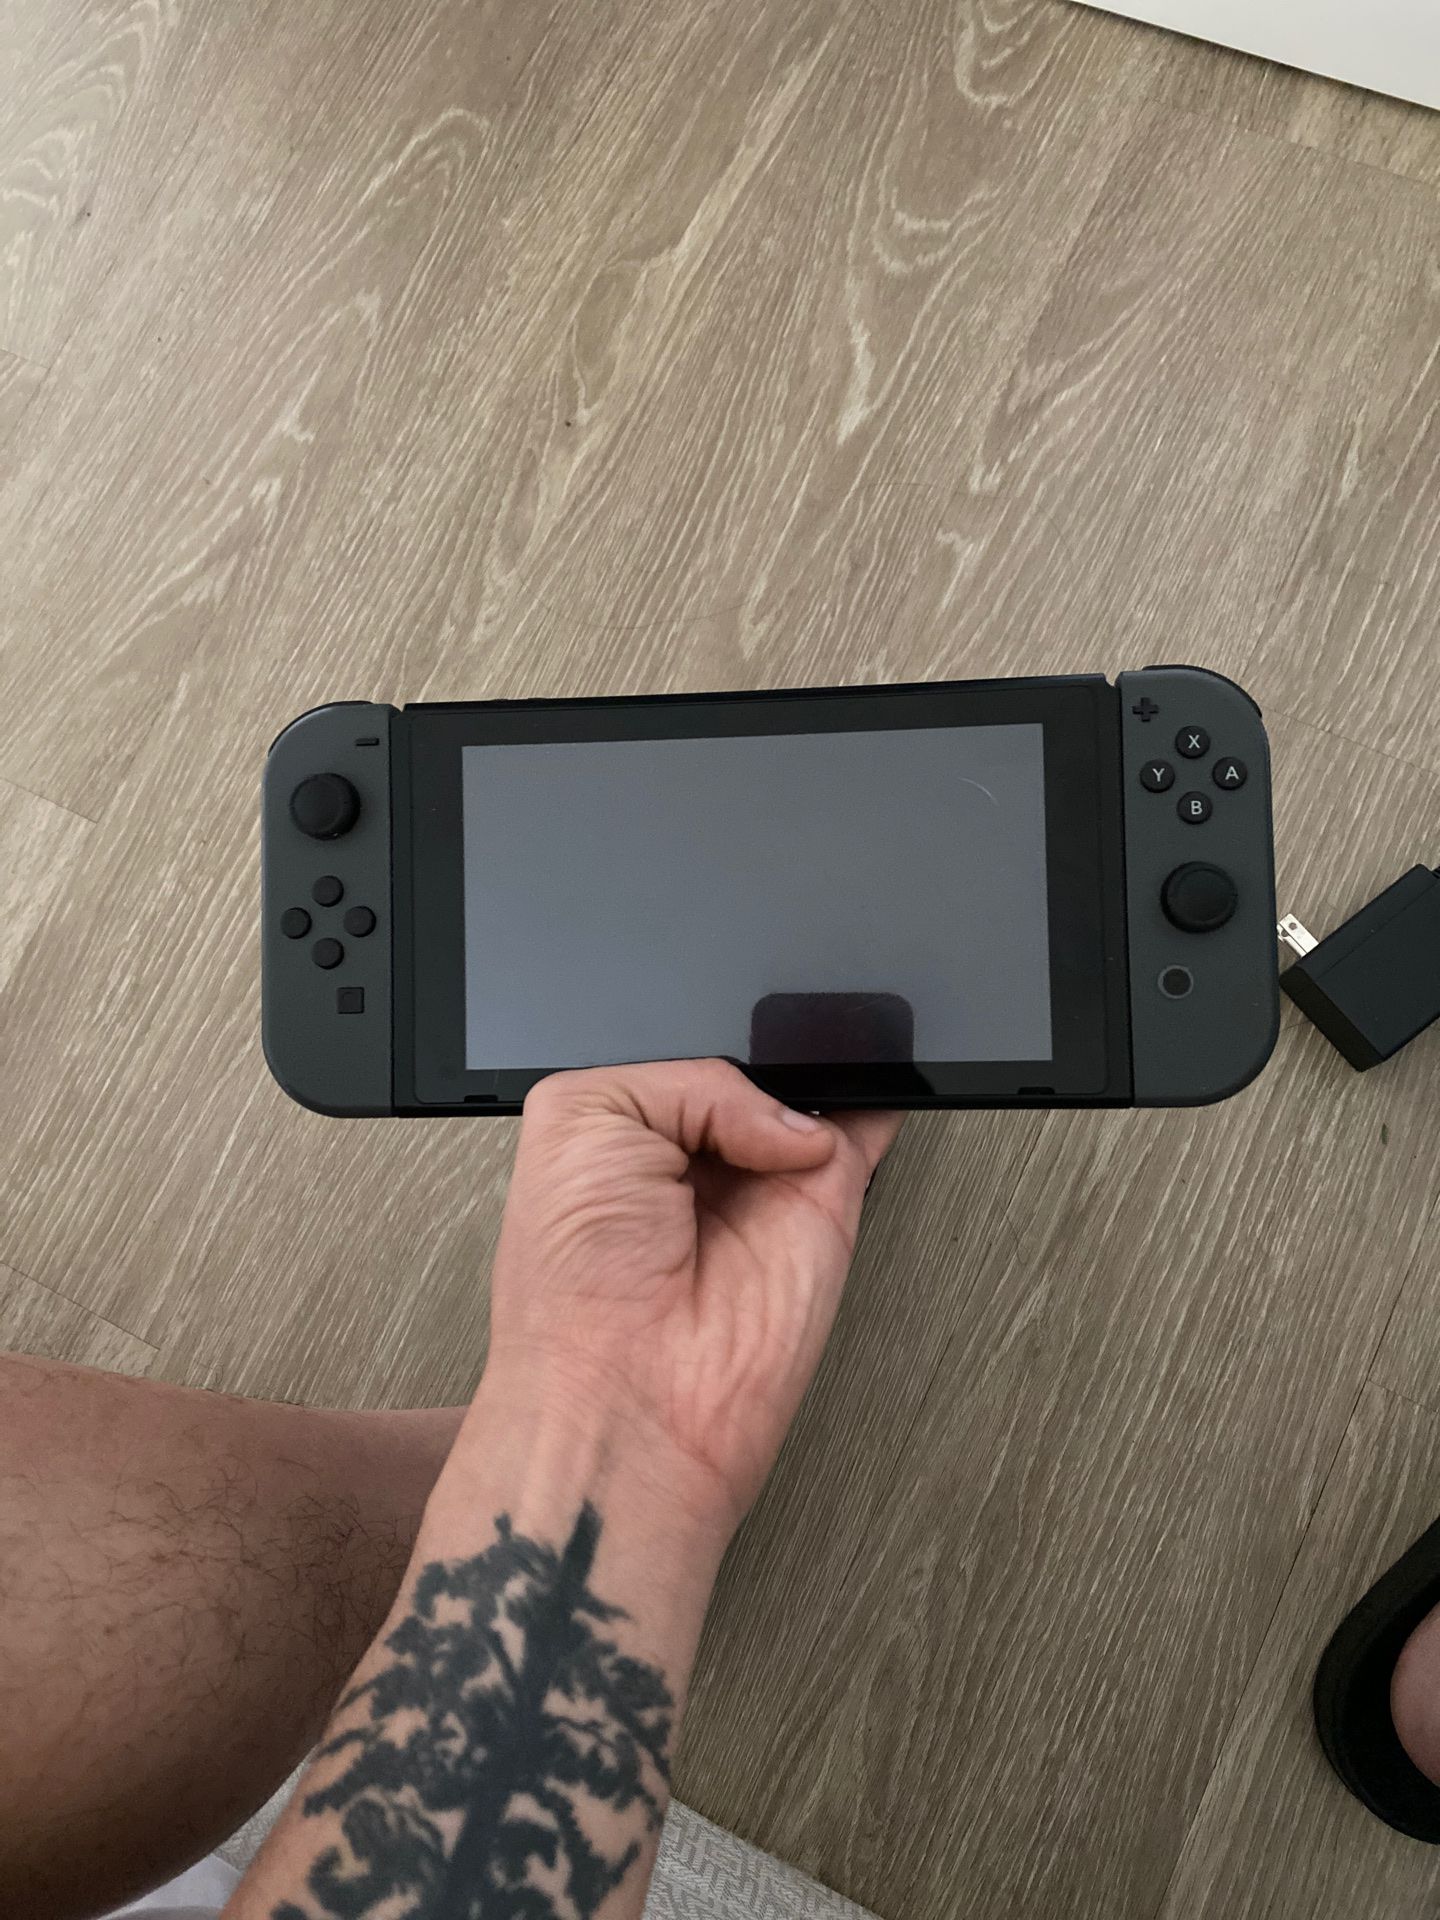 Nintendo Switch - Like New! Comes with two wired controllers and Super Mario Party